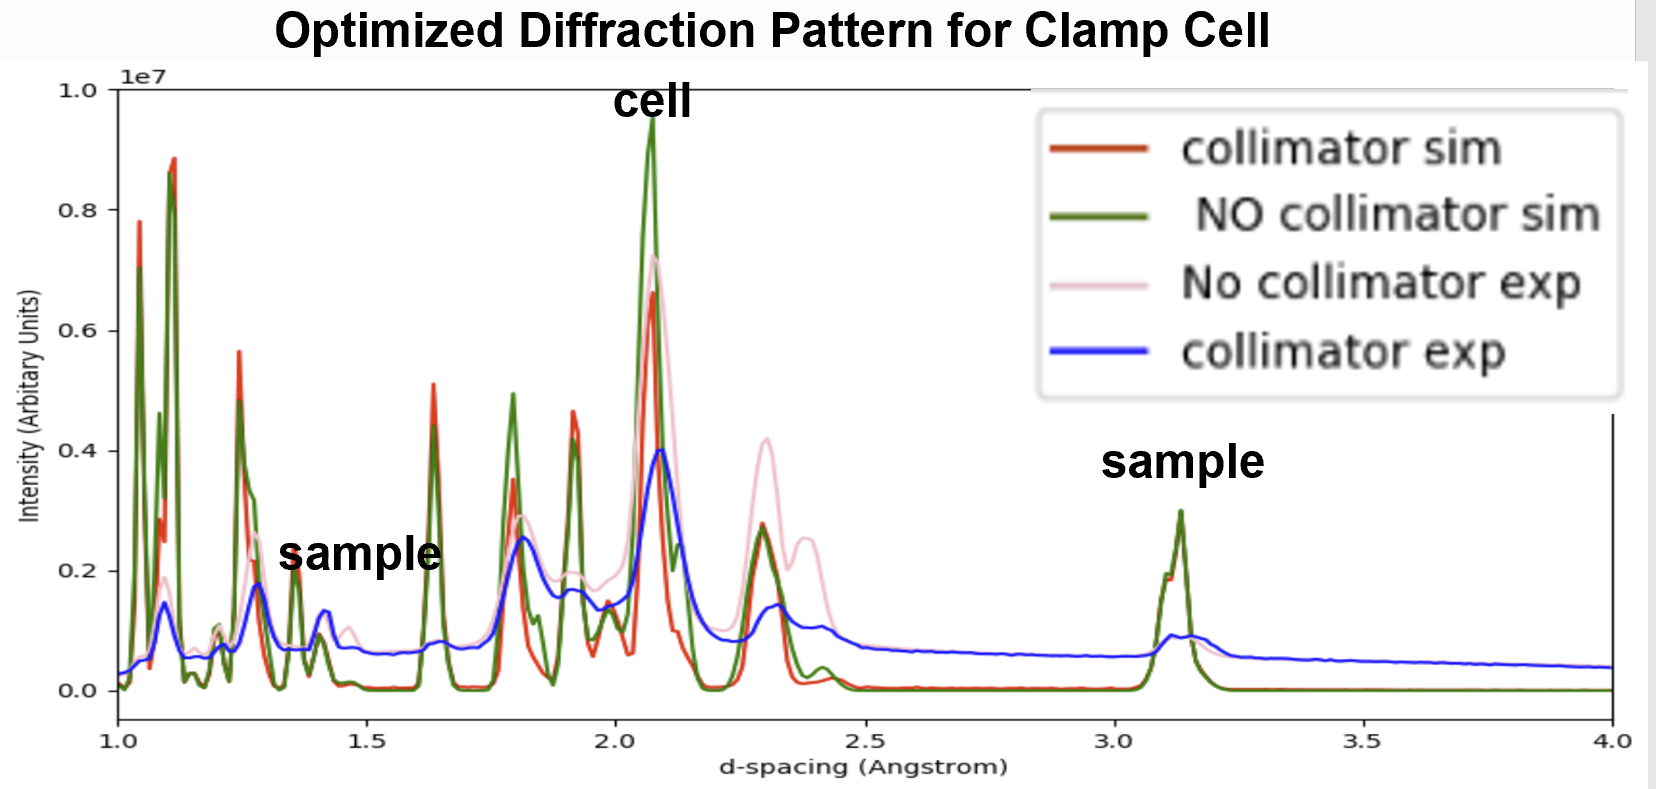 https://raw.githubusercontent.com/Fahima-Islam/c3dp/master/figures/diffraction_pattern_clamp_cell.PNG